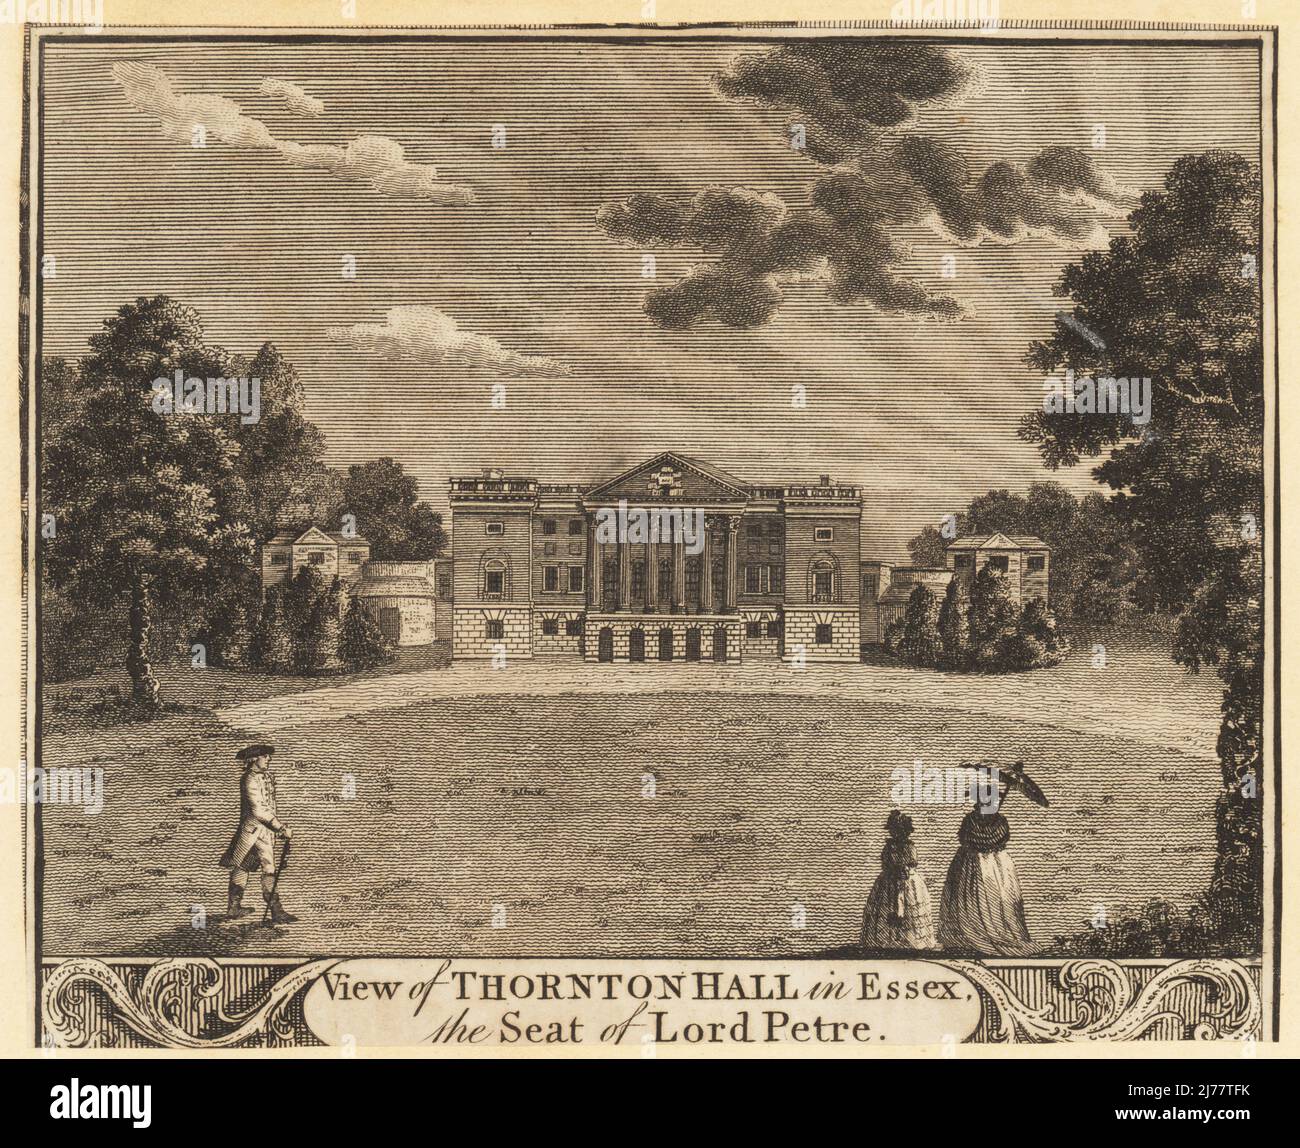 View of Thornton Hall in Essex, the seat of Lord Petre. Robert Edward Petre, 9th Baron Petre, 1742-1801. Georgian Palladian country house built by architect James Paine in 1764. View from the park, driveway in front of the colonnade, three figures in the foreground, one woman holding an open parasol. Copperplate engraving from William Thornton’s New, Complete and Universal History of the City of London, Alexander Hogg, King's Arms, No. 16 Paternoster Row, London, 1784. Stock Photo